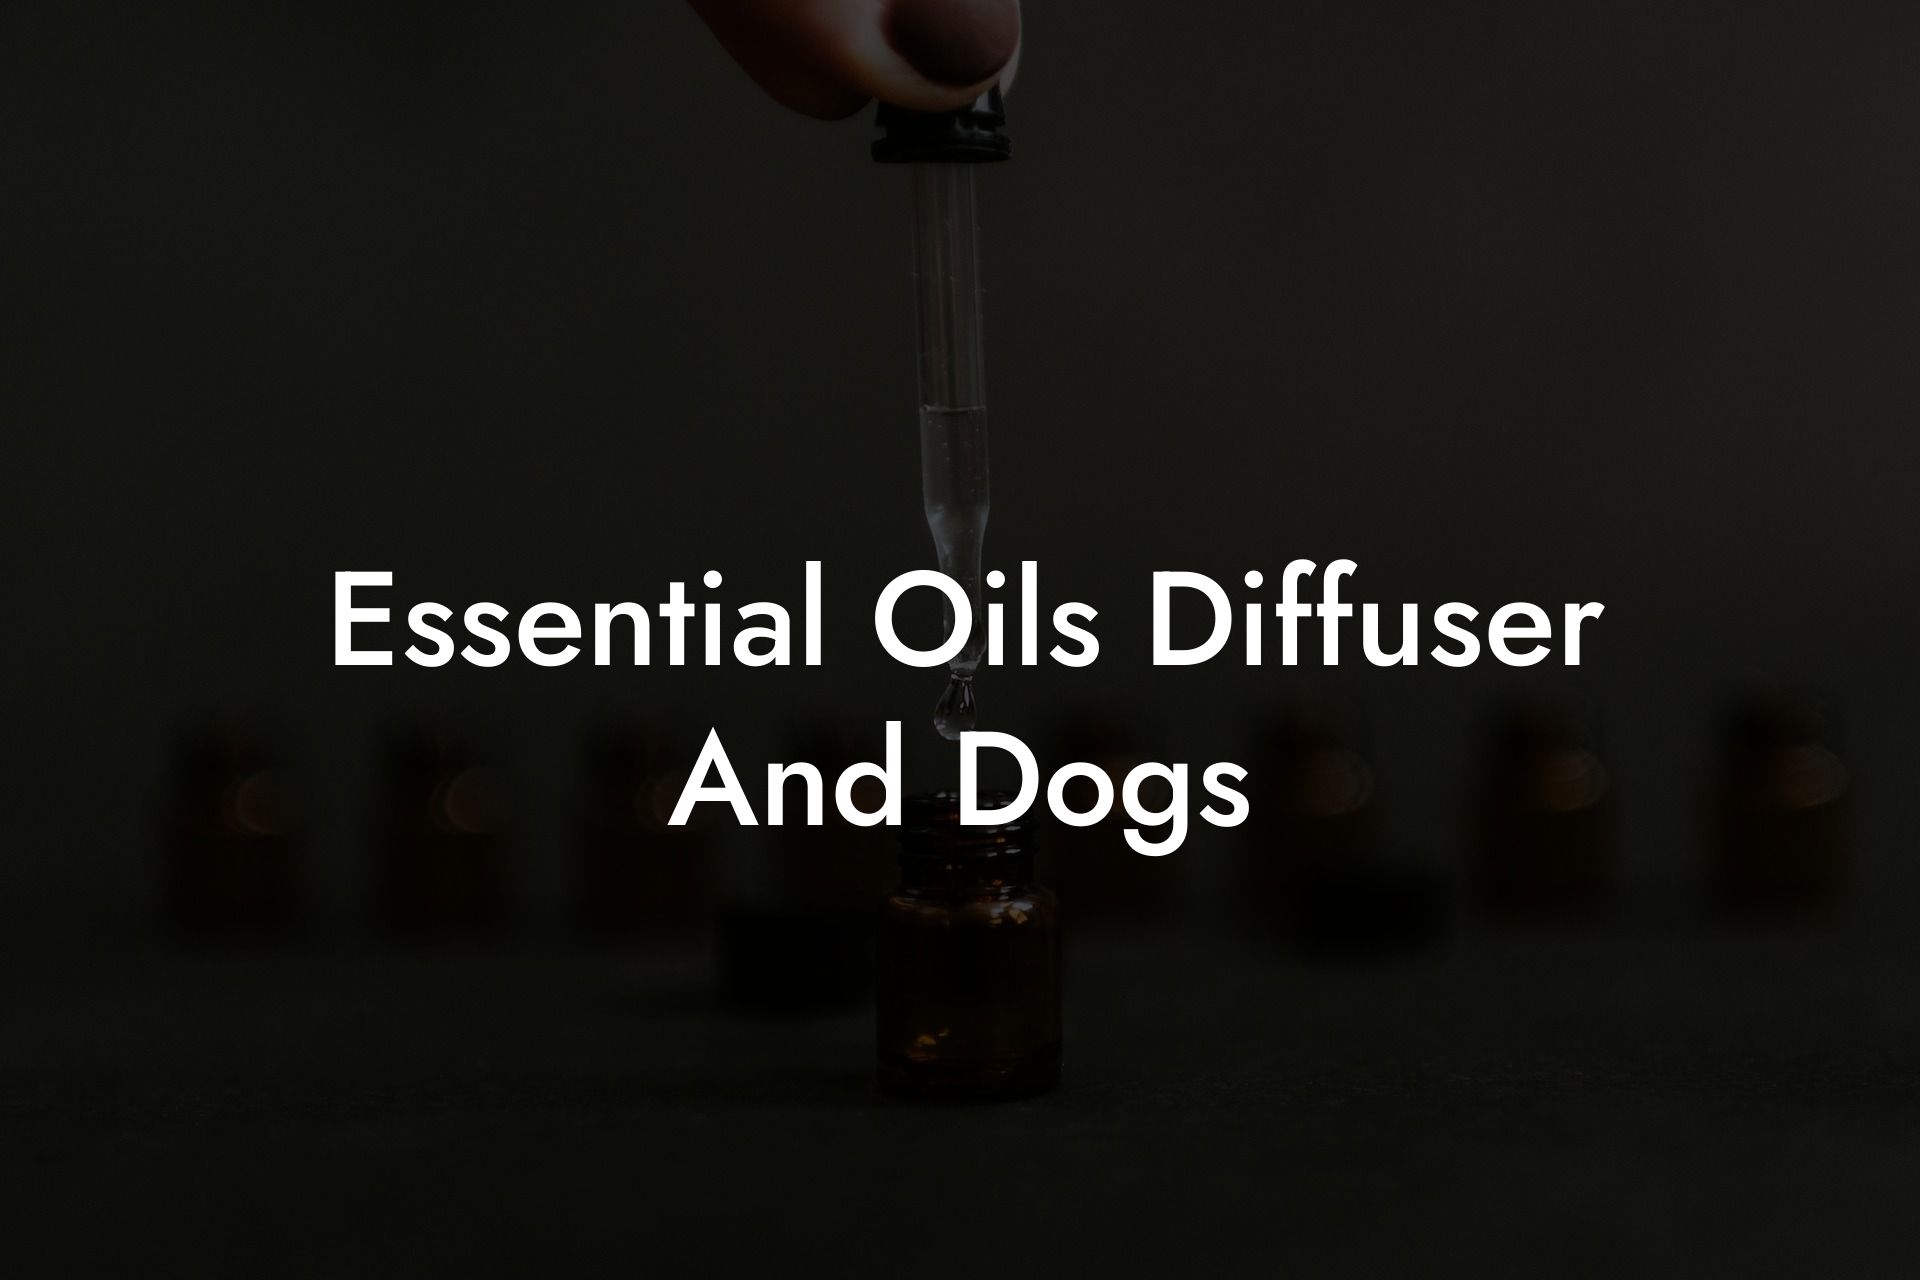 Essential Oils Diffuser And Dogs